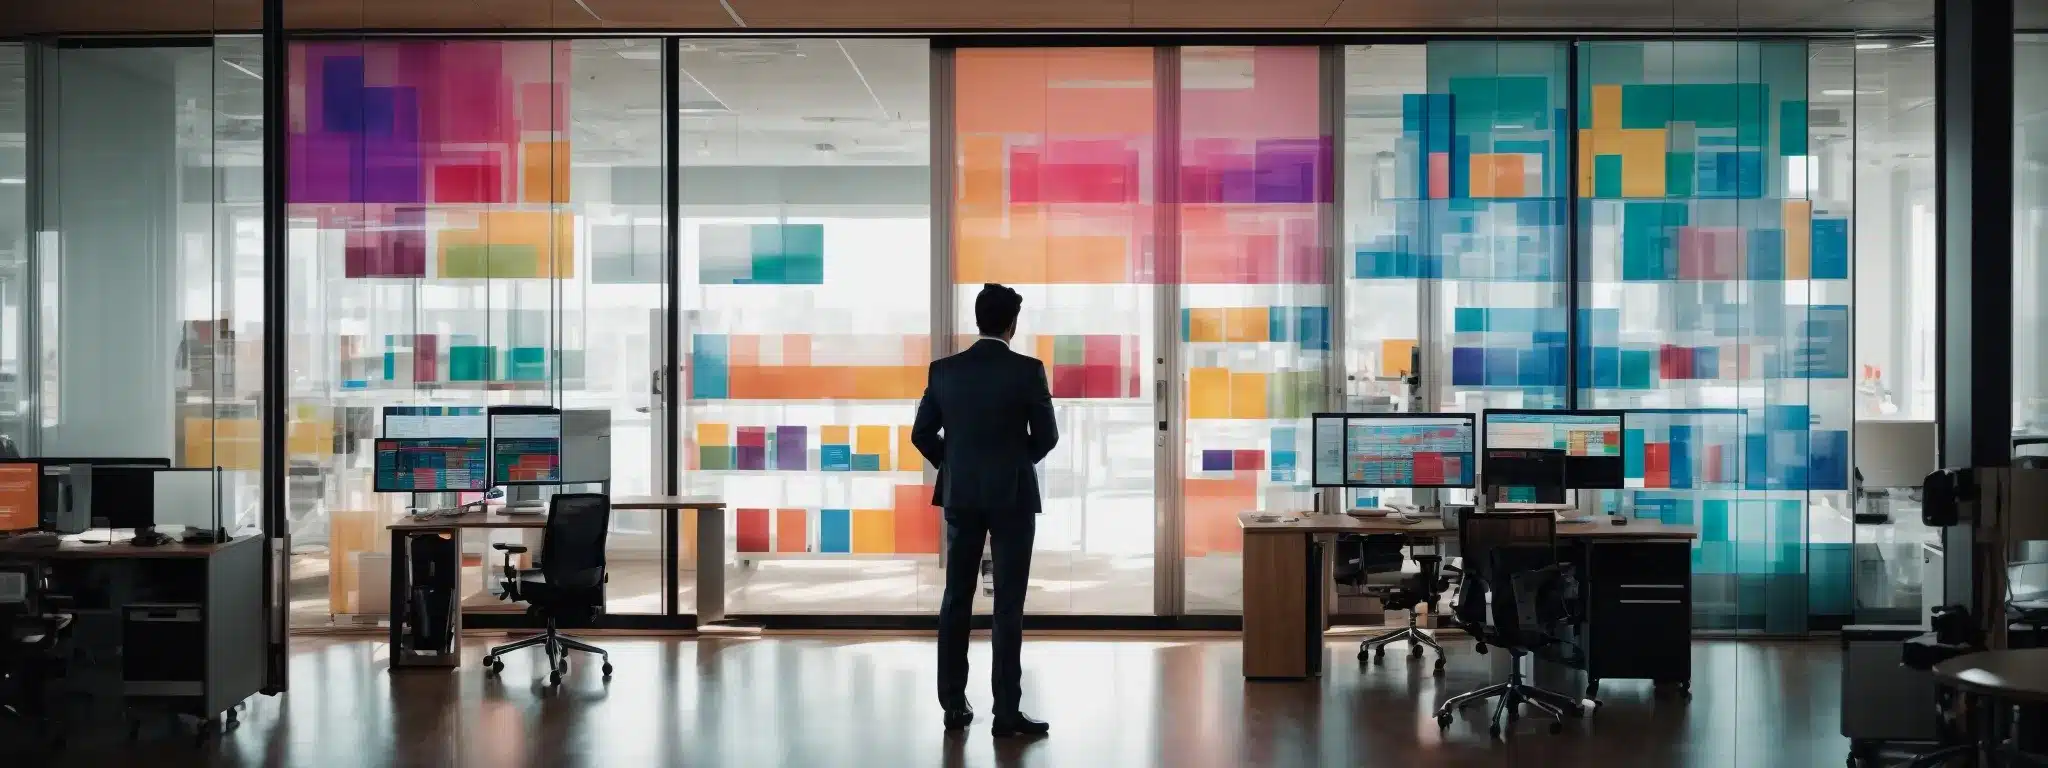 A Person Silhouette Opening Large Double Doors Into A Bright, Organized Office Space With Multiple Computer Screens Displaying Colorful Graphs And Charts.